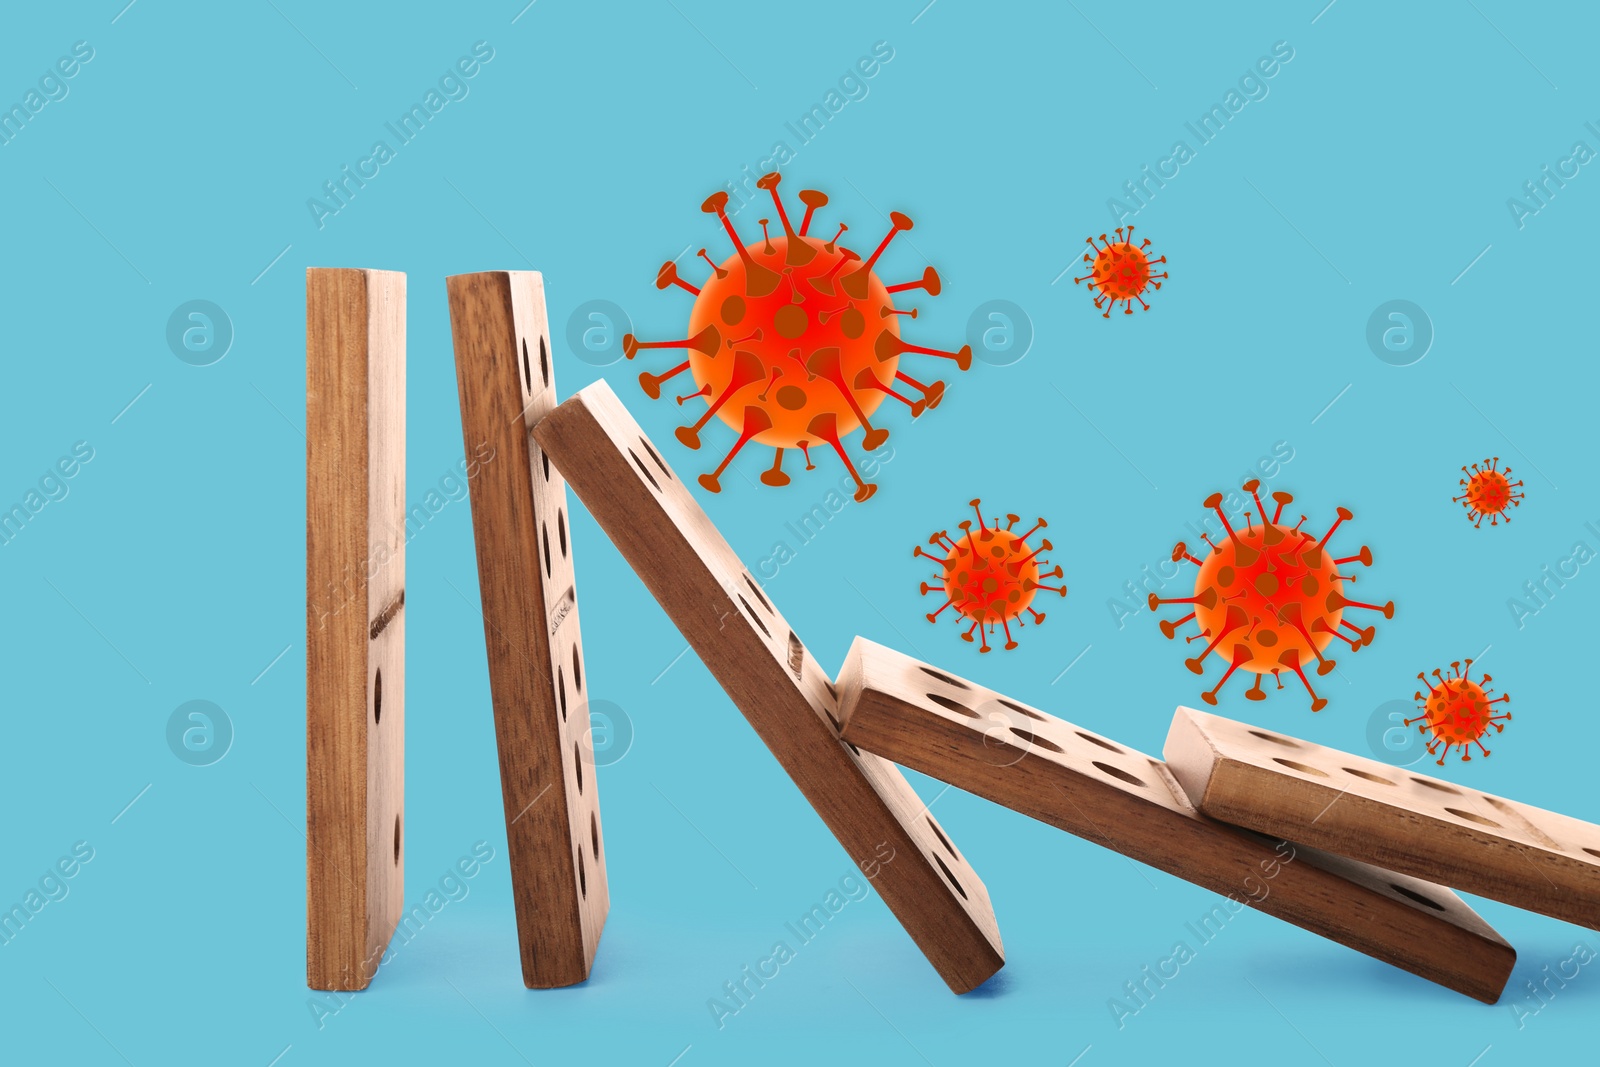 Image of Concept of spreading coronavirus. Wooden domino tiles falling on blue background